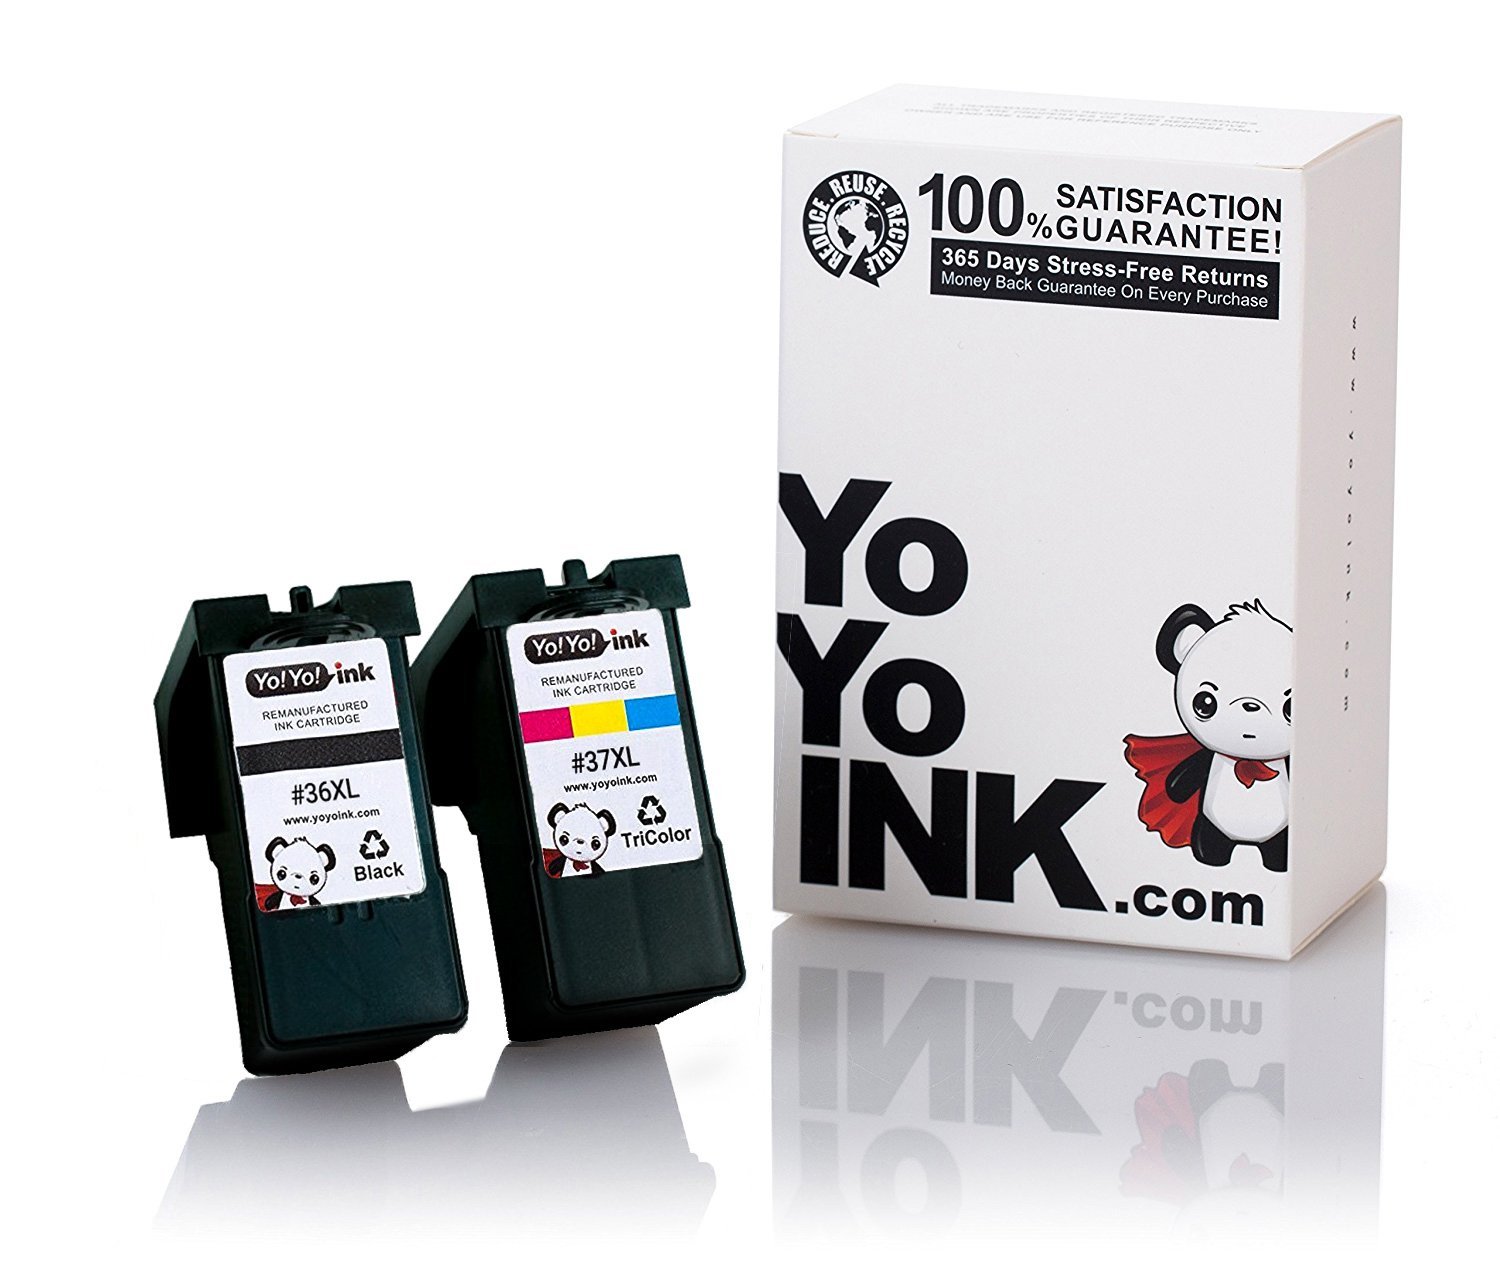 Lexmark 36XL & 37XL Black and Color Ink Cartridges, Remanufactured High Yield - 2-Pack (1 Black, 1 C